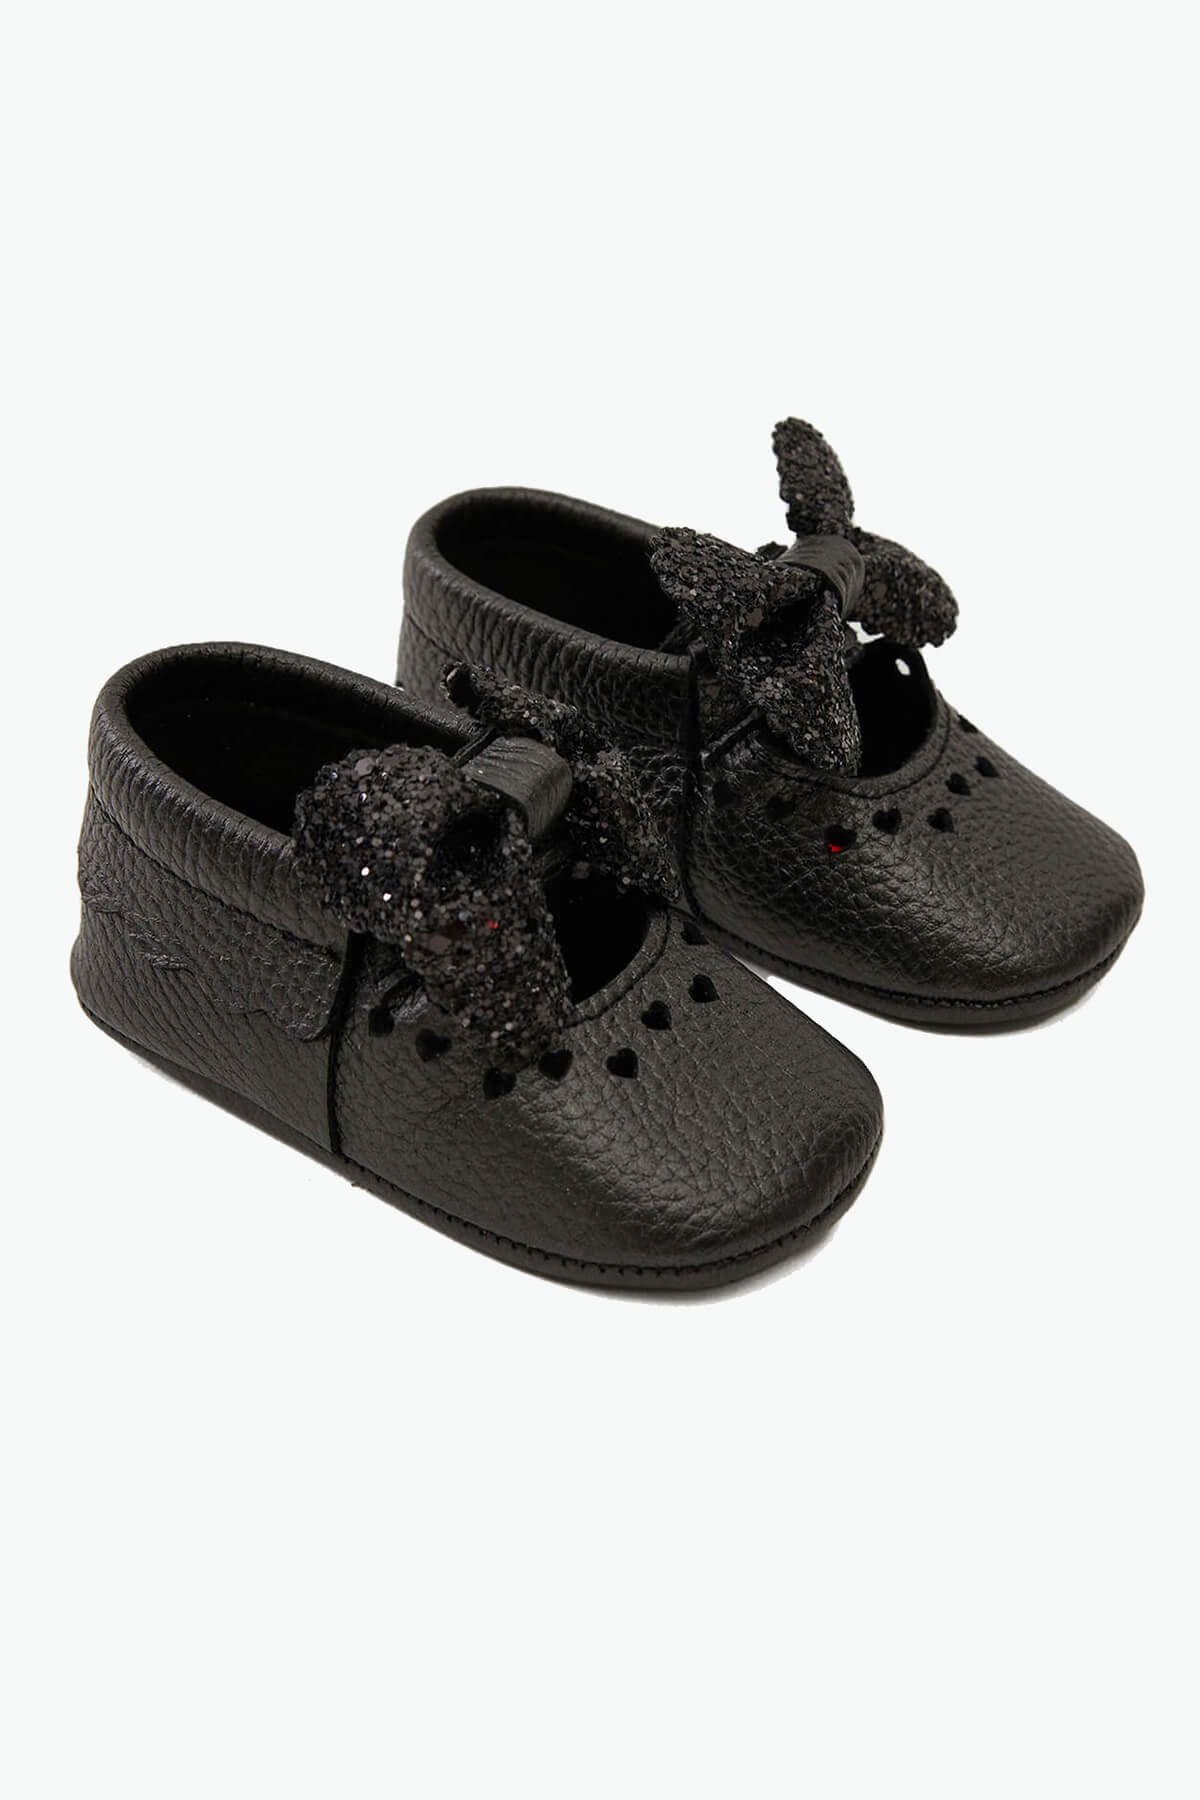 Heart Genuine Leather Baby Shoes Black Ribbon